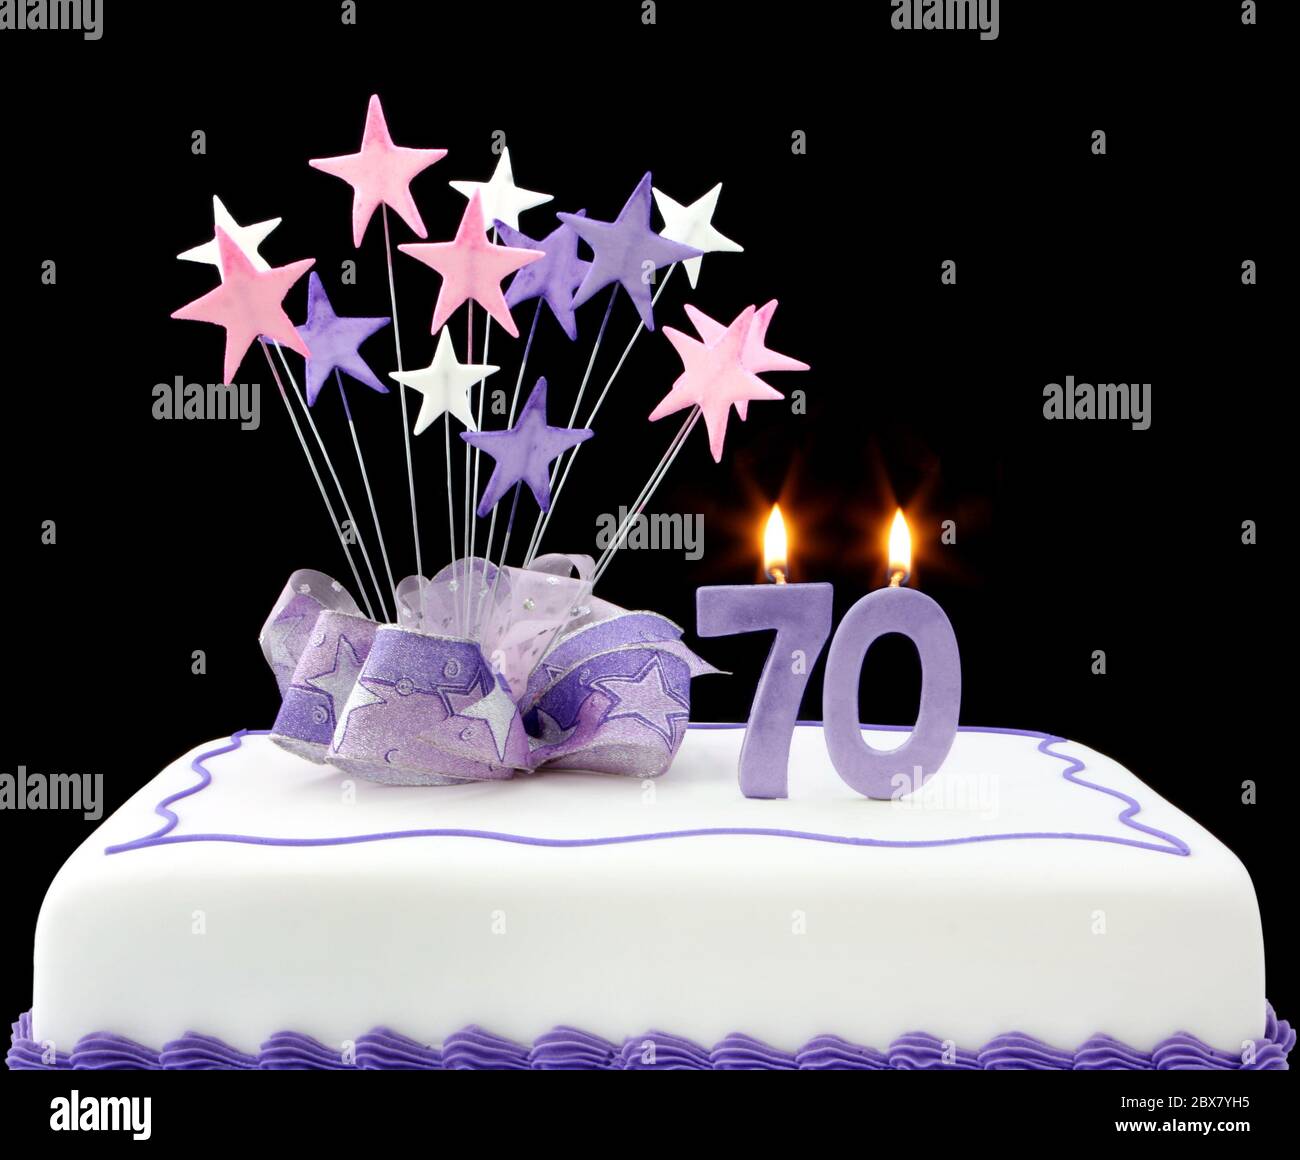 Fancy cake with number 70 candles.  Decorated with ribbons and star-shapes, in pastel tones on black background. Stock Photo